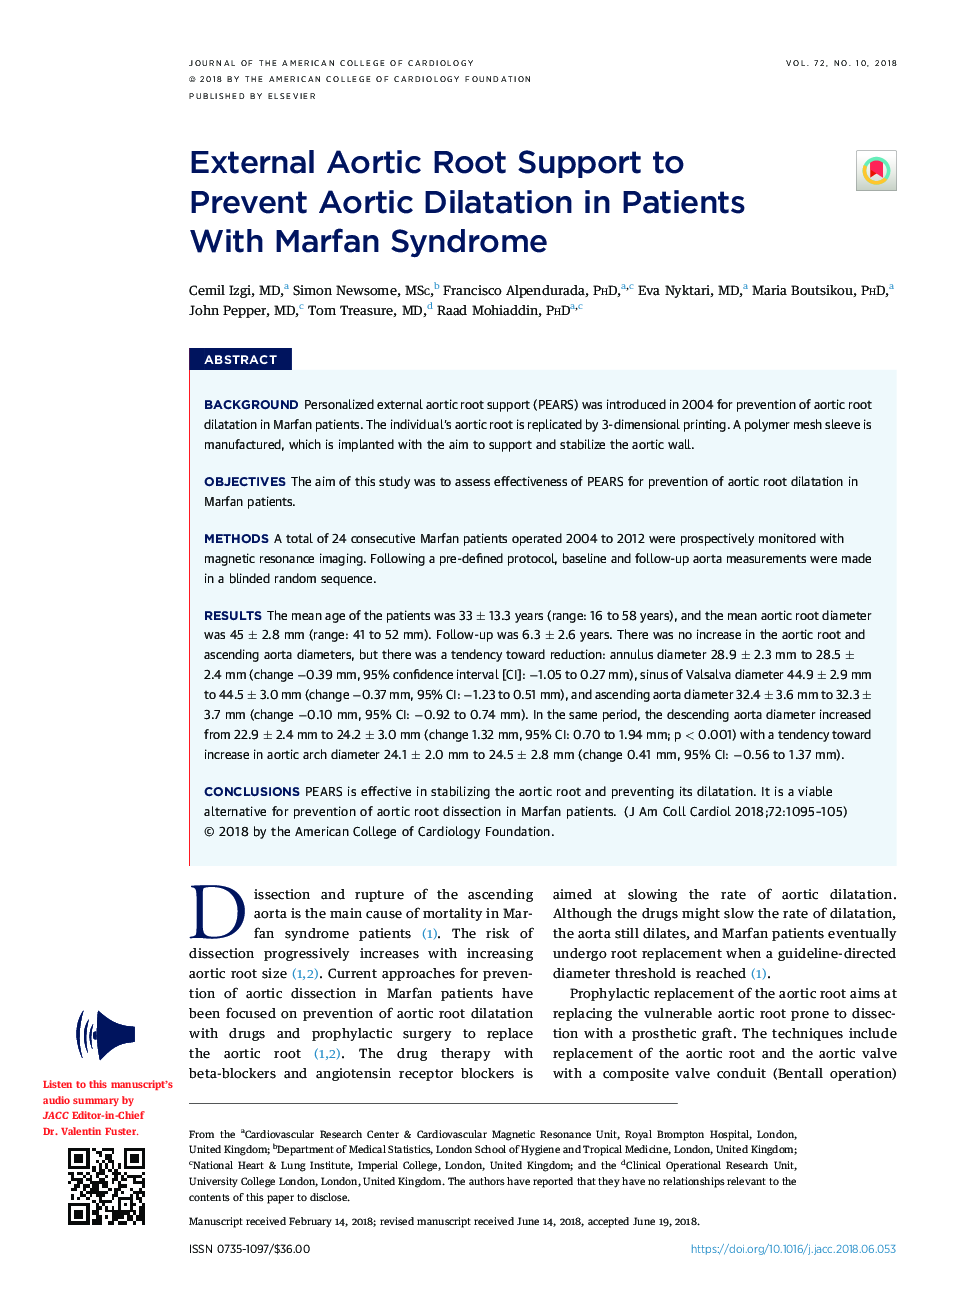 External Aortic Root Support to PreventÂ Aortic Dilatation in Patients WithÂ MarfanÂ Syndrome